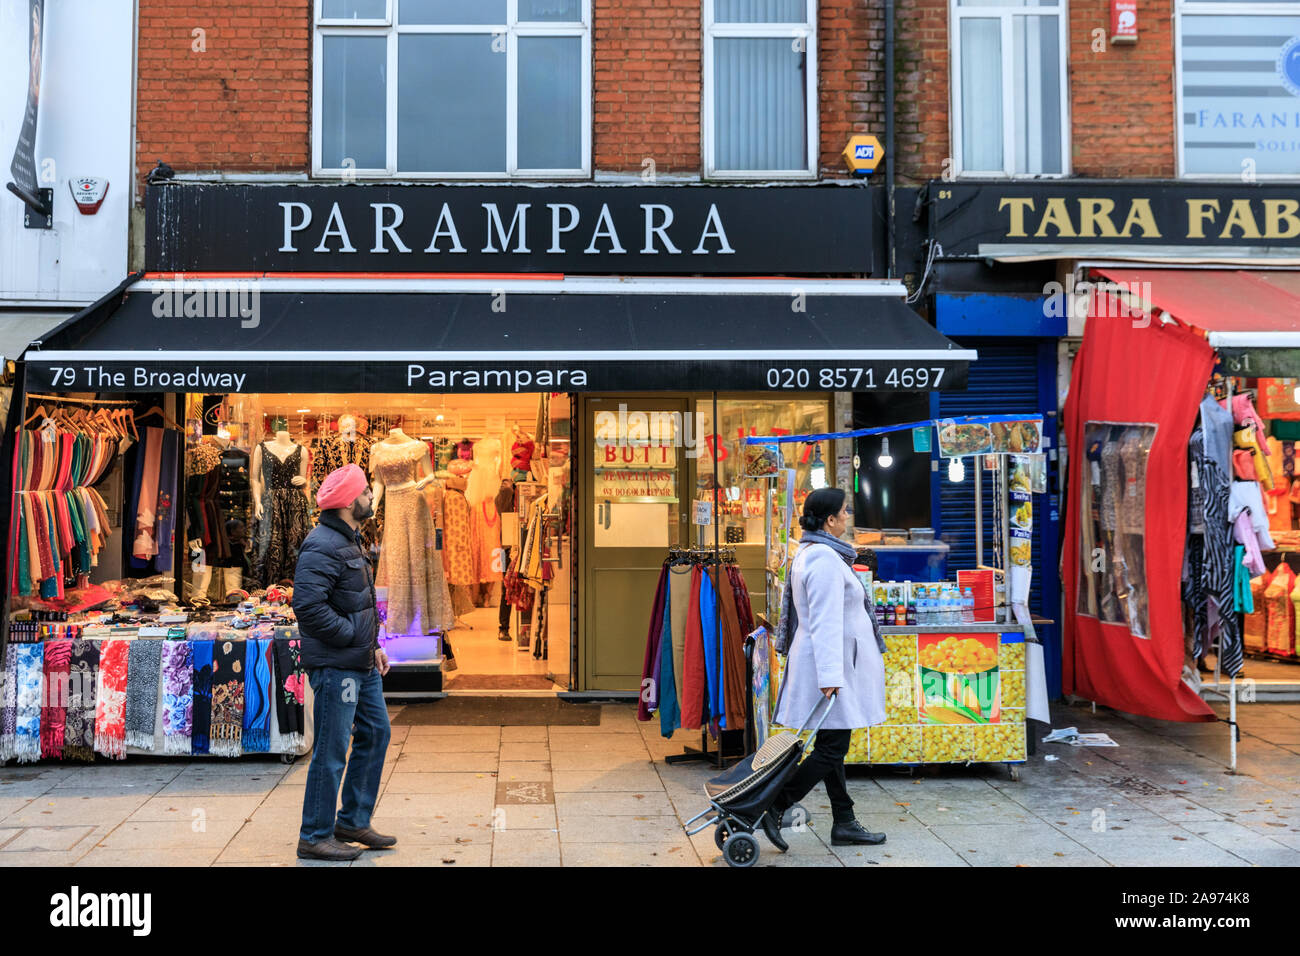 D Mall Asian clothing shops exterior view of people browsing, Southall High Street, London, UK Stock Photo